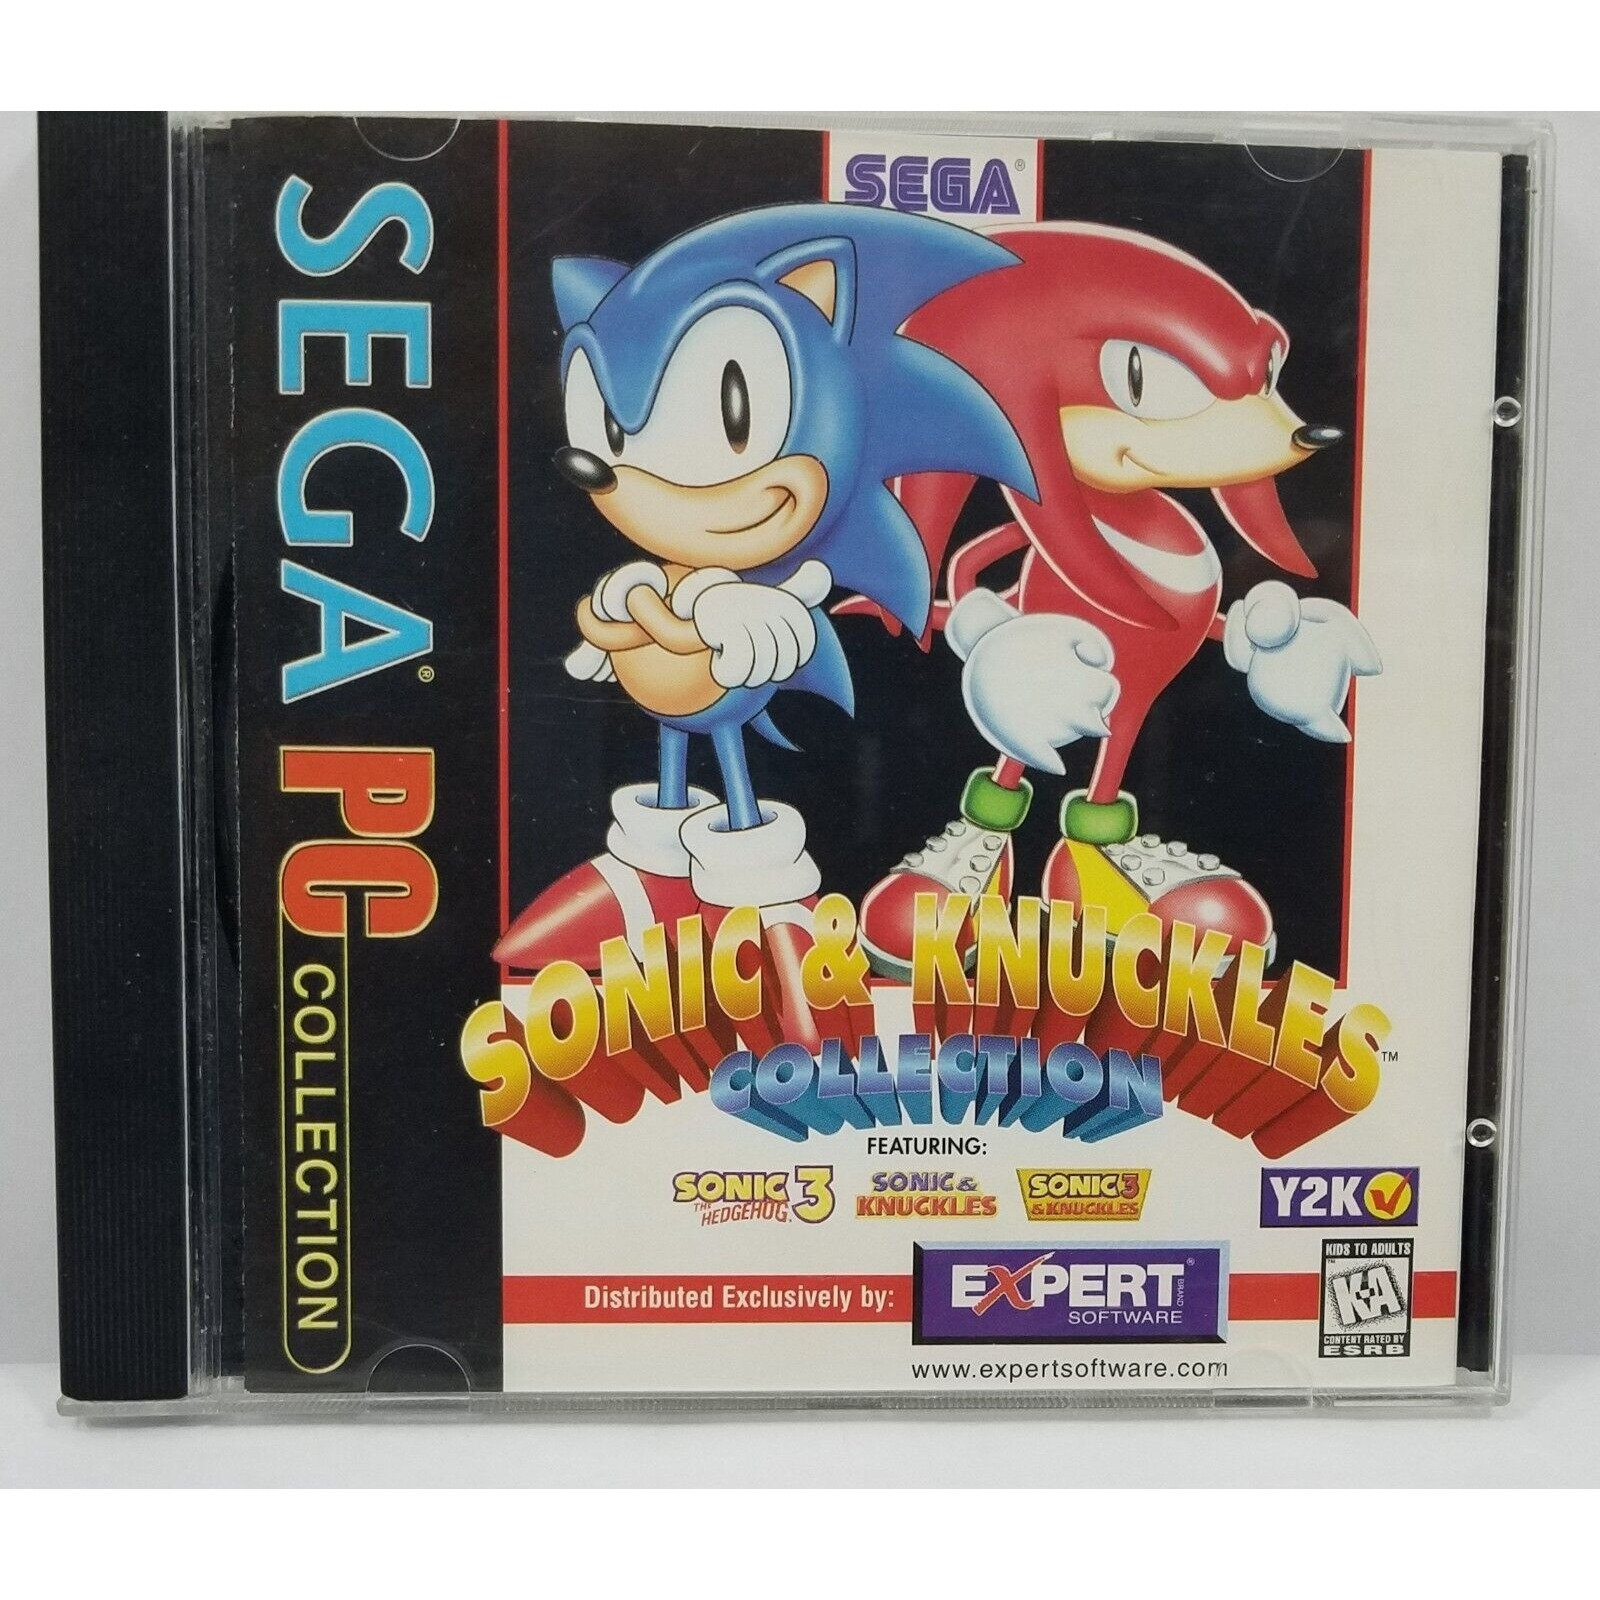 Sonic & Knuckles Sonic 3 Collection PC CD-ROM 3 Games In One - FREE Postage